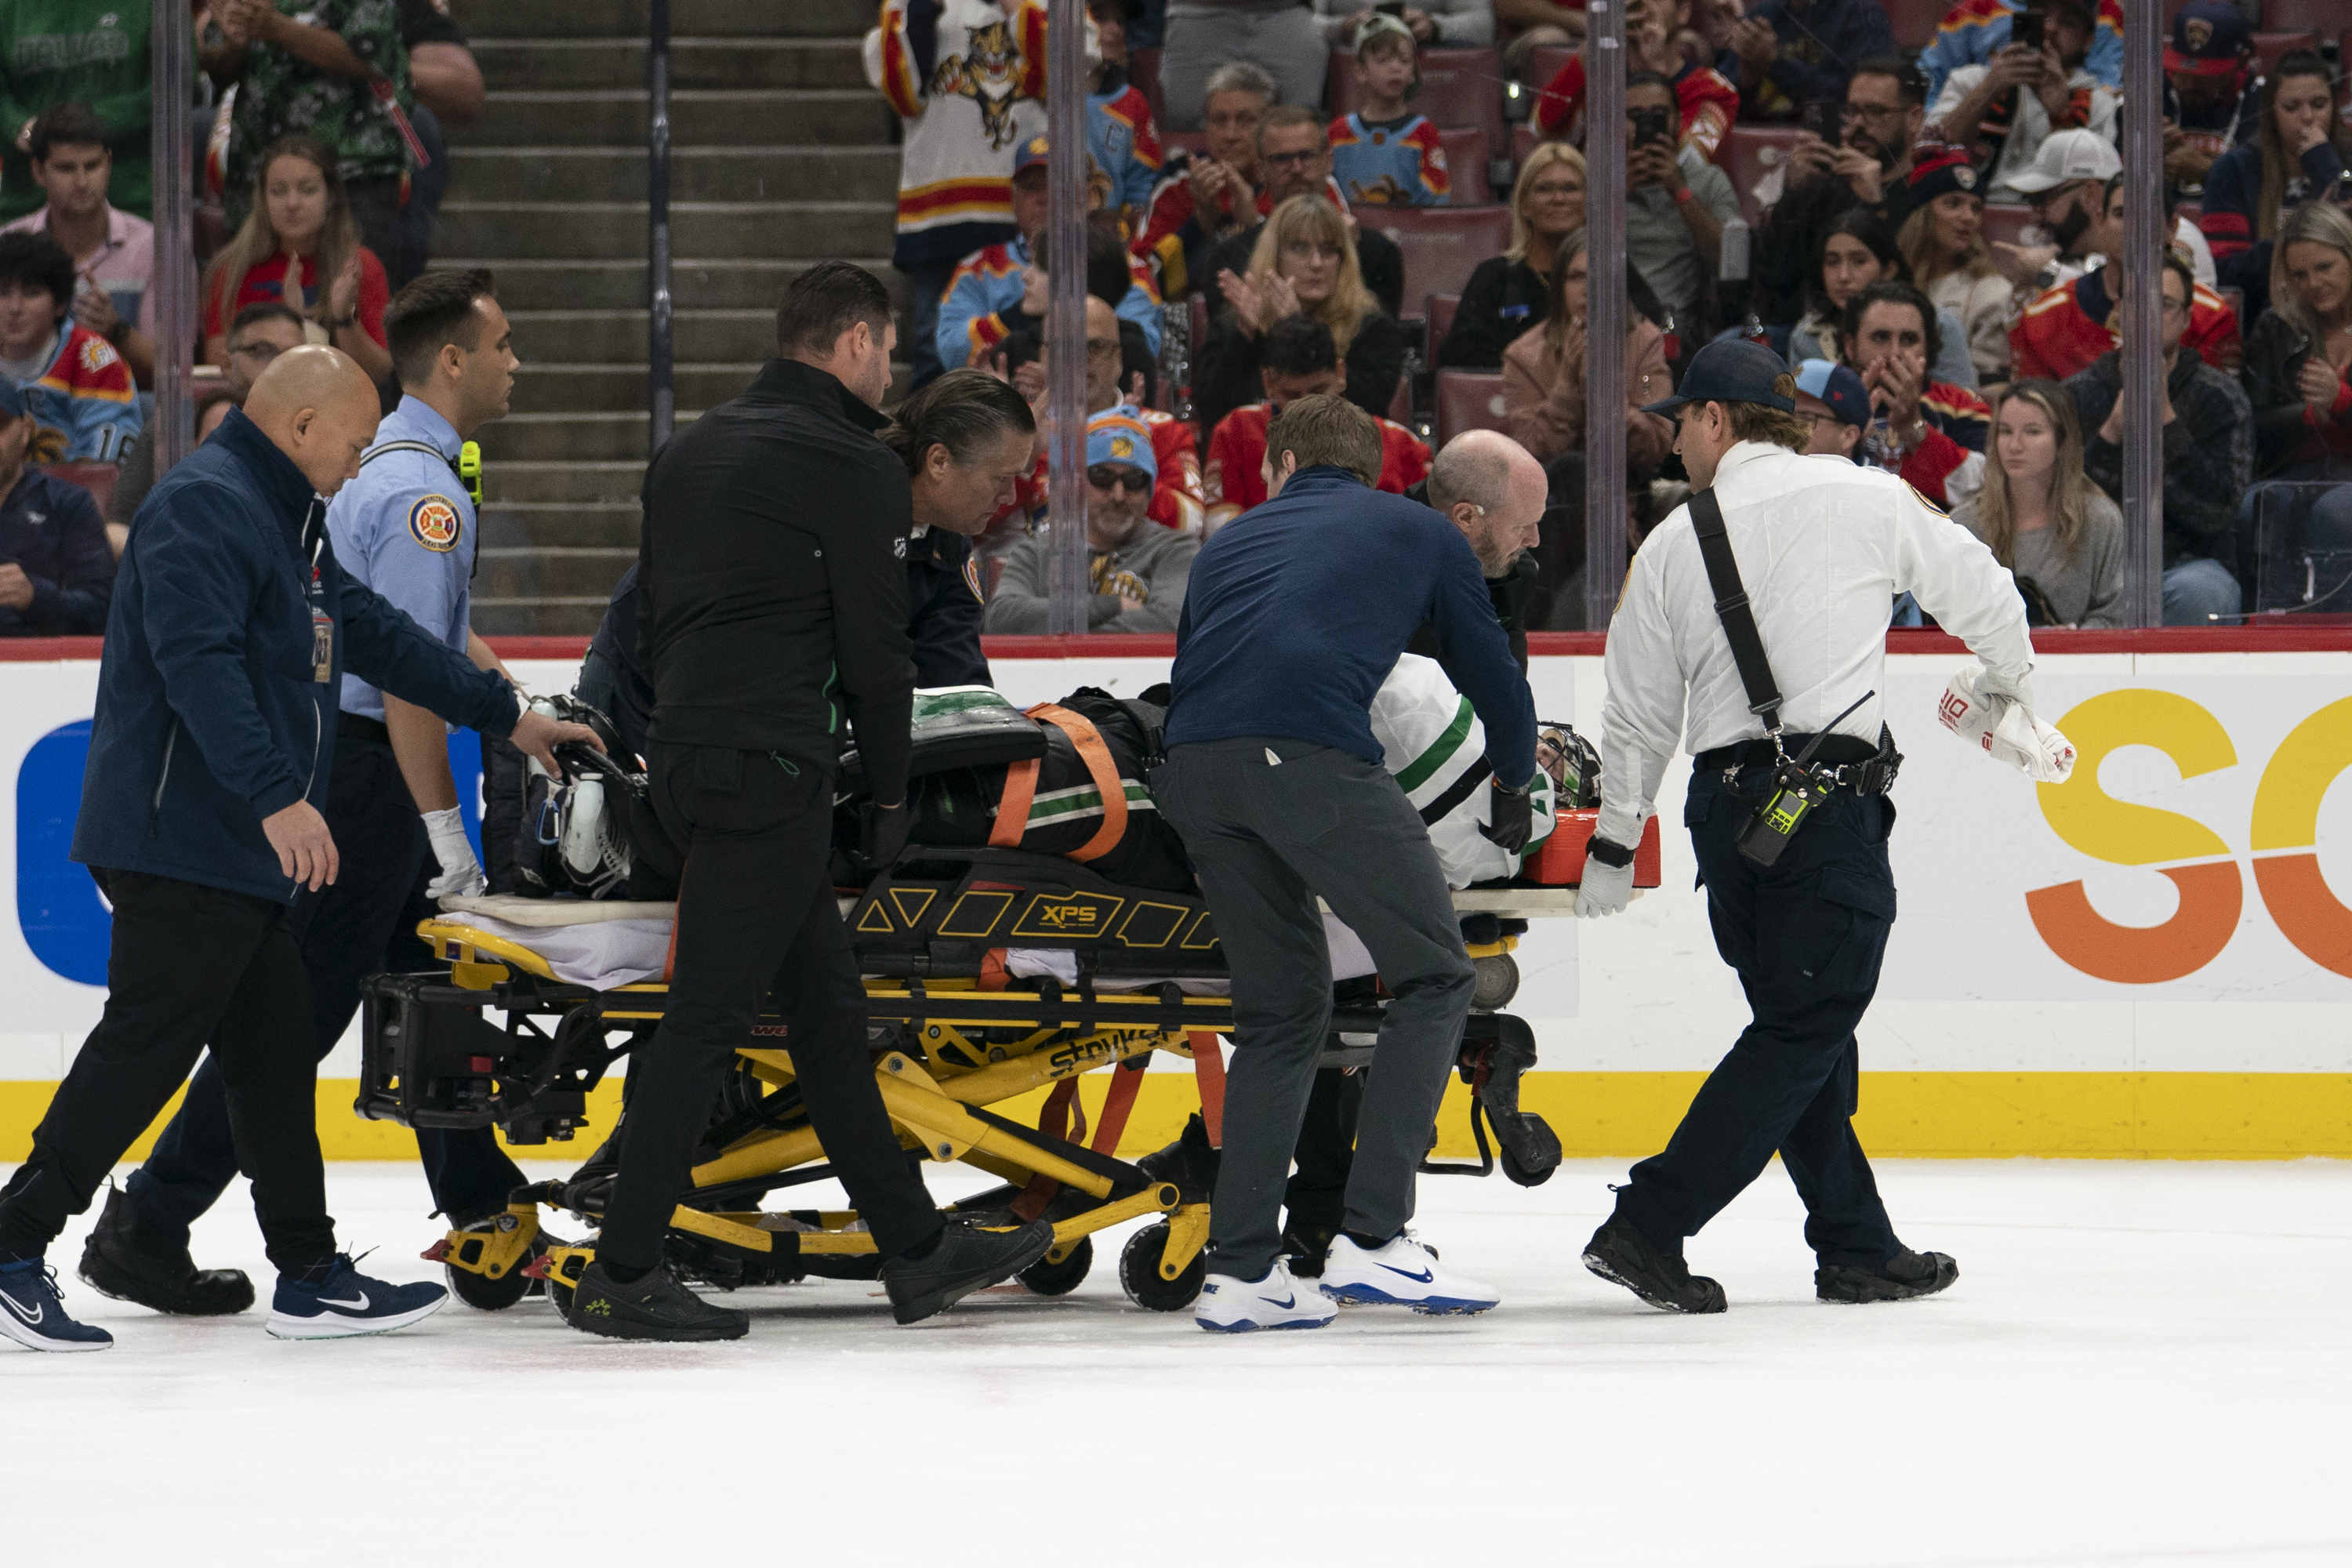 Stars' Wedgewood day-to-day after being stretchered off vs. Panthers